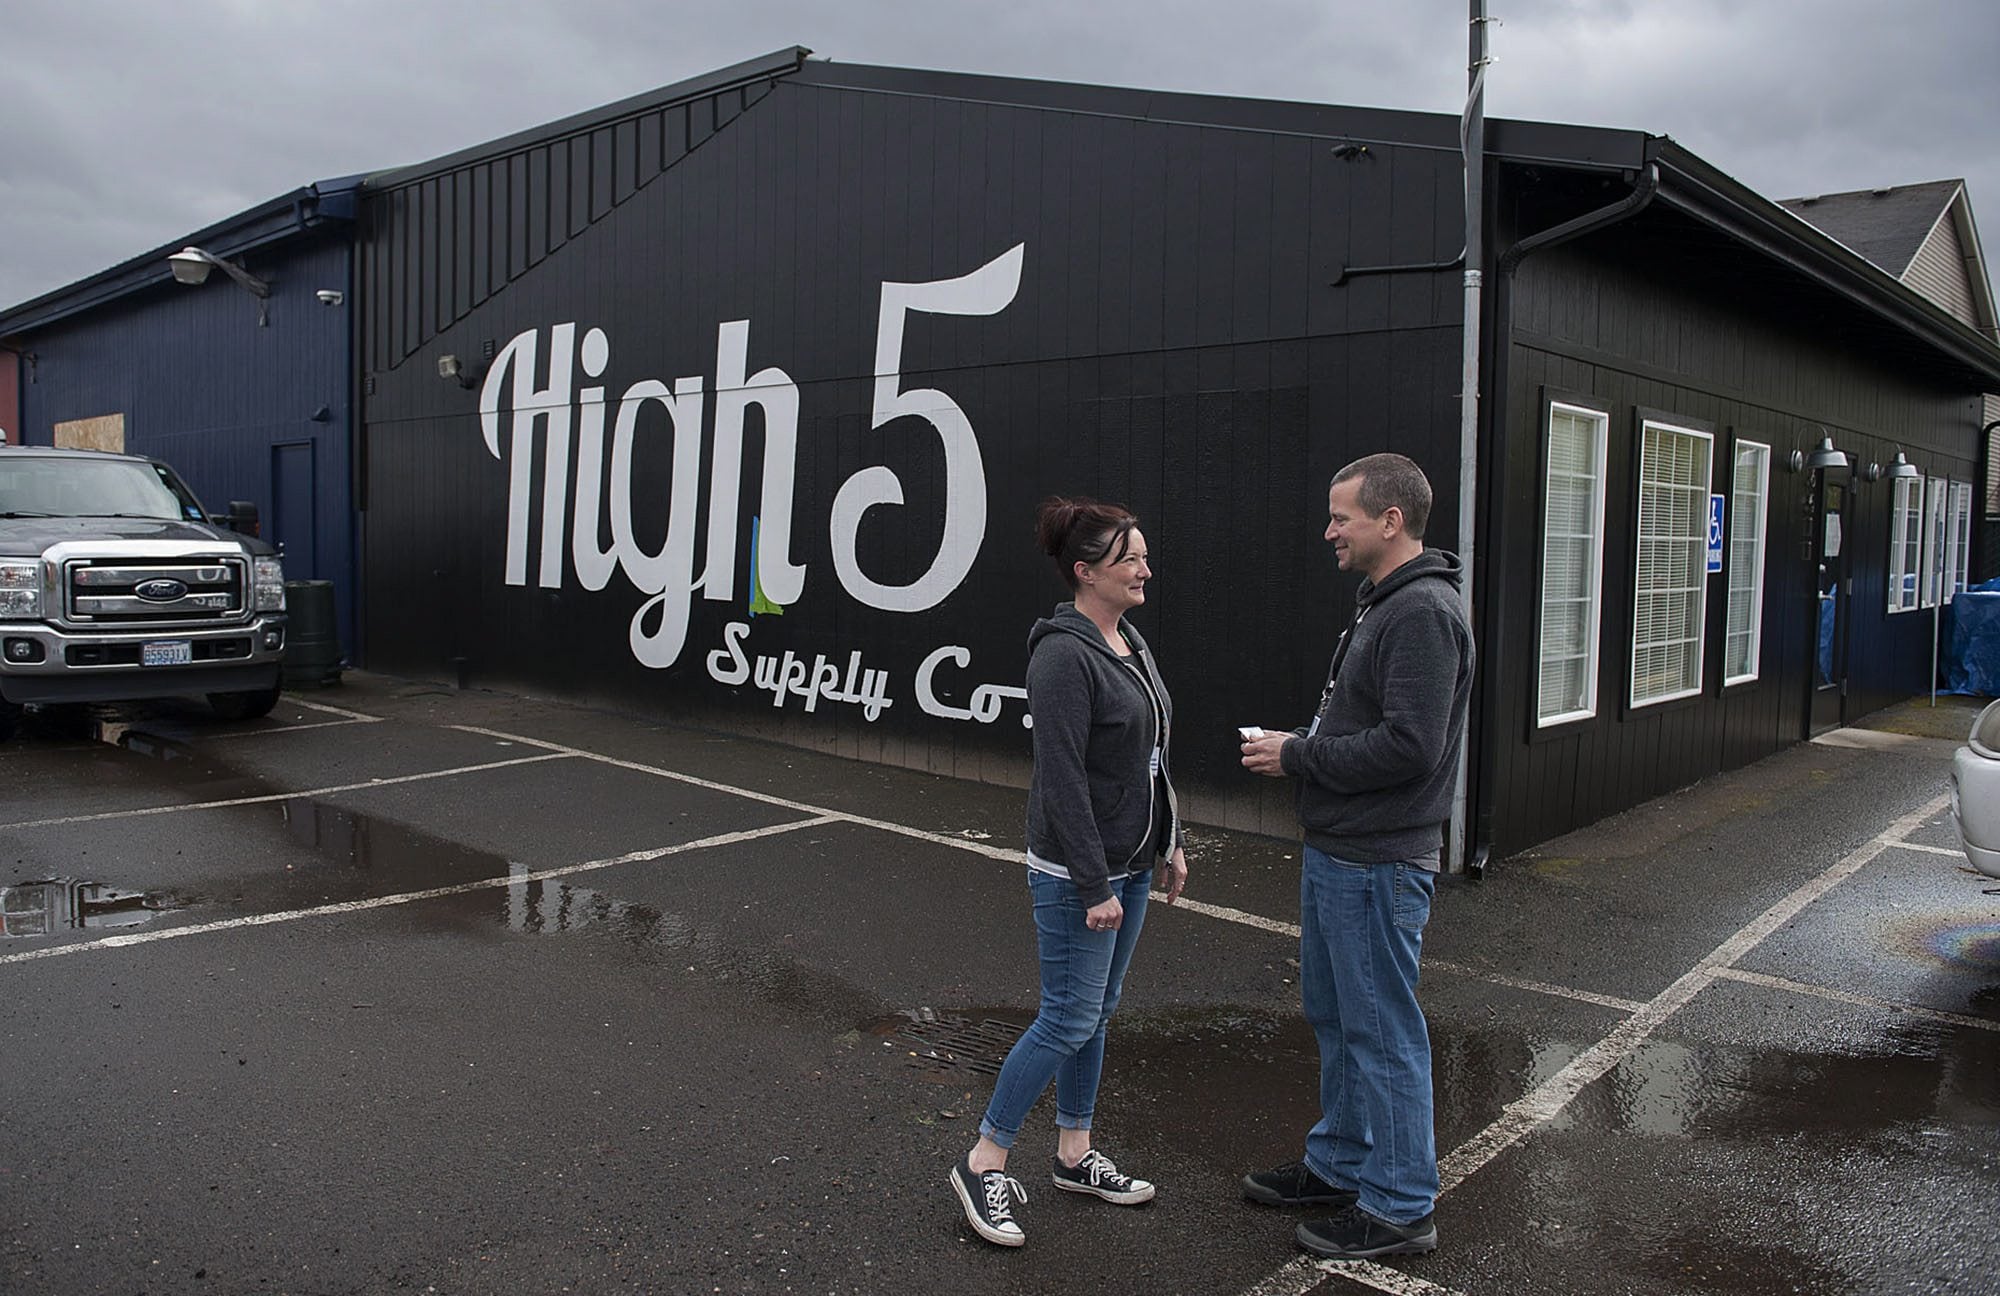 High-5 Cannabis manager Calista Crenshaw and owner Jon Britt have been busy outfitting their new recreational marijuana shop in preparation for its March 12 opening in Orchards.